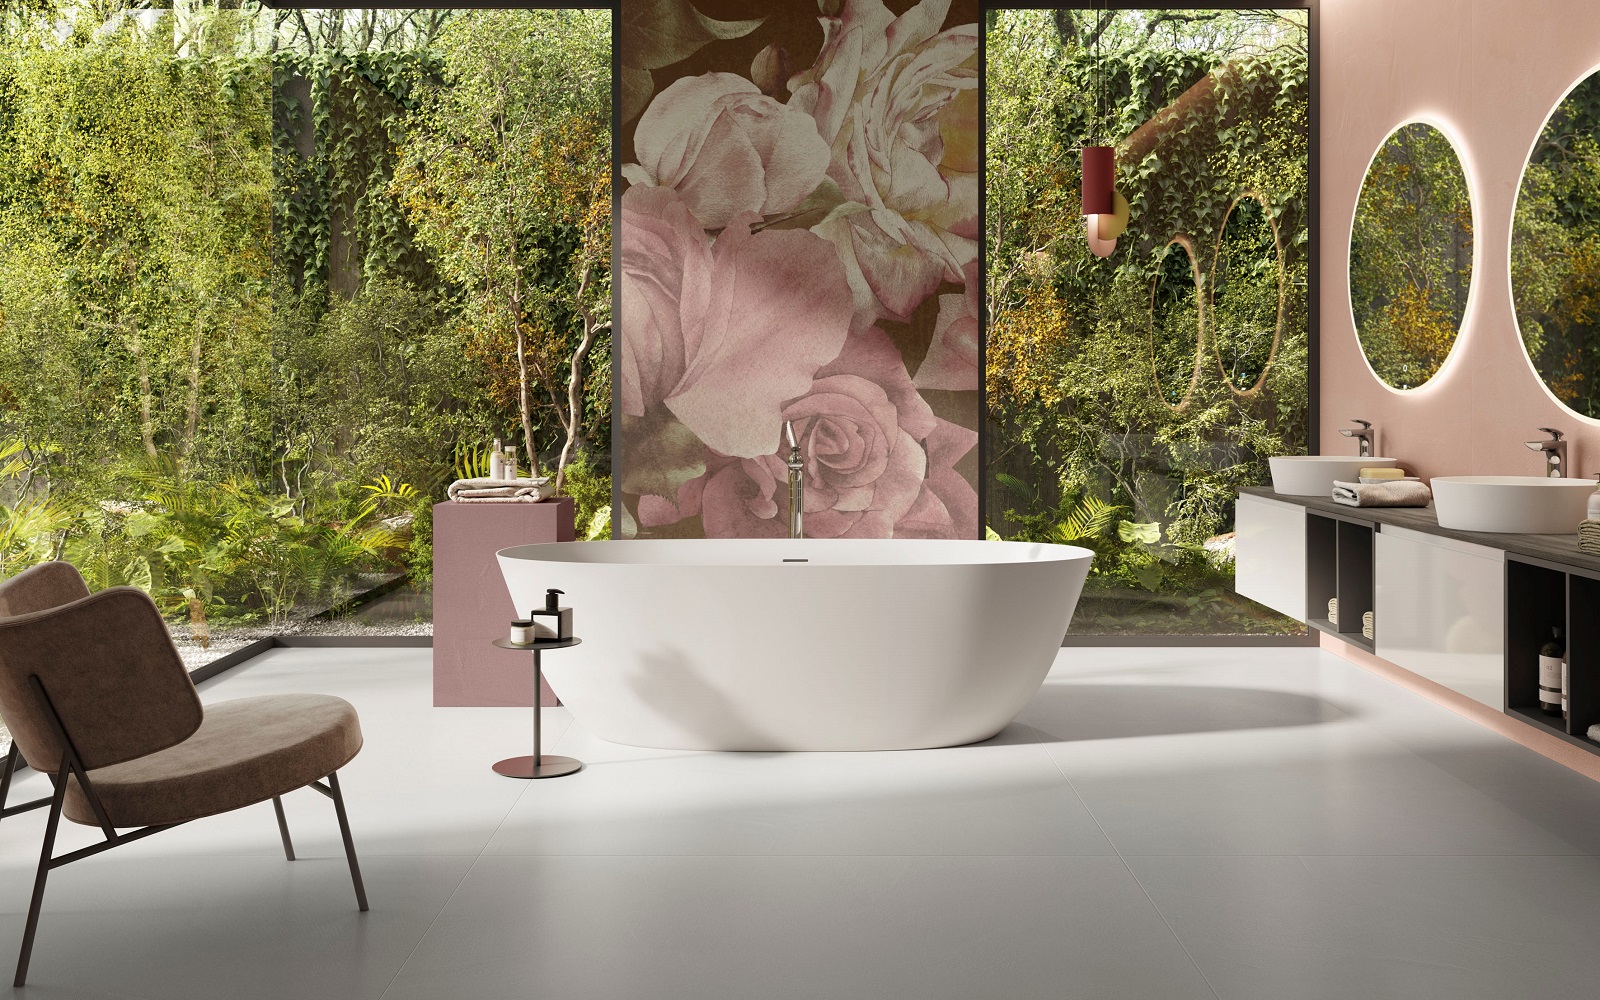 RAK Metamorfosi collection makes a visual statement on the wall behind a freestanding bath